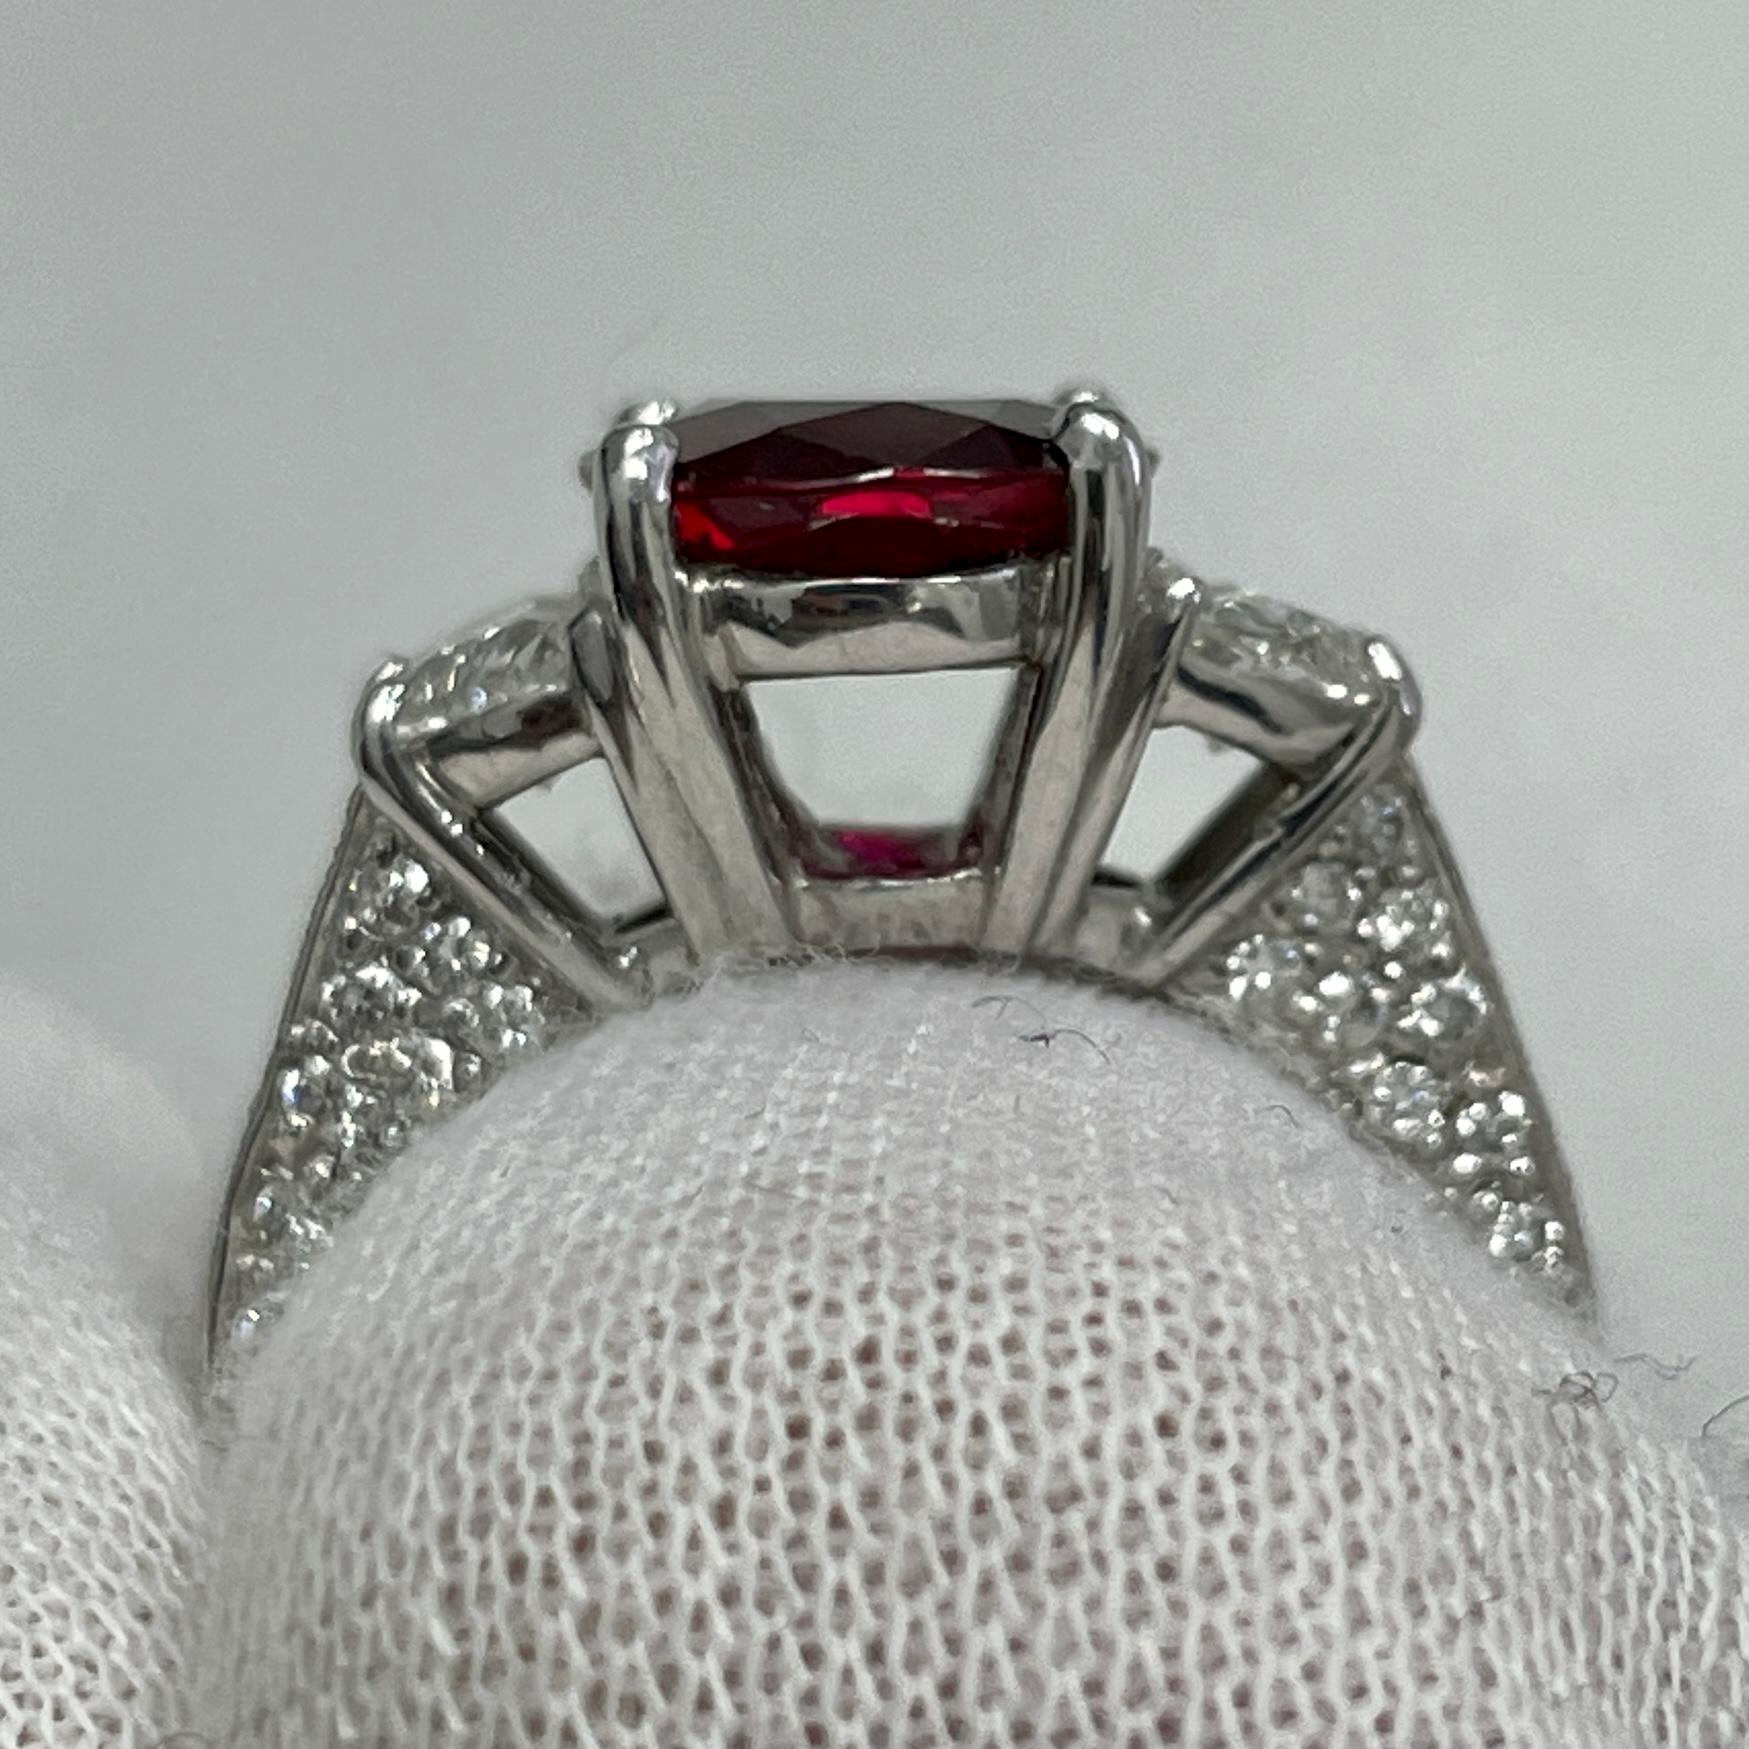 This is an incredibly spready ruby mounted in a platinum ring with brilliant white half-moon diamonds and signed by JB Star. Suitable for any occasion!